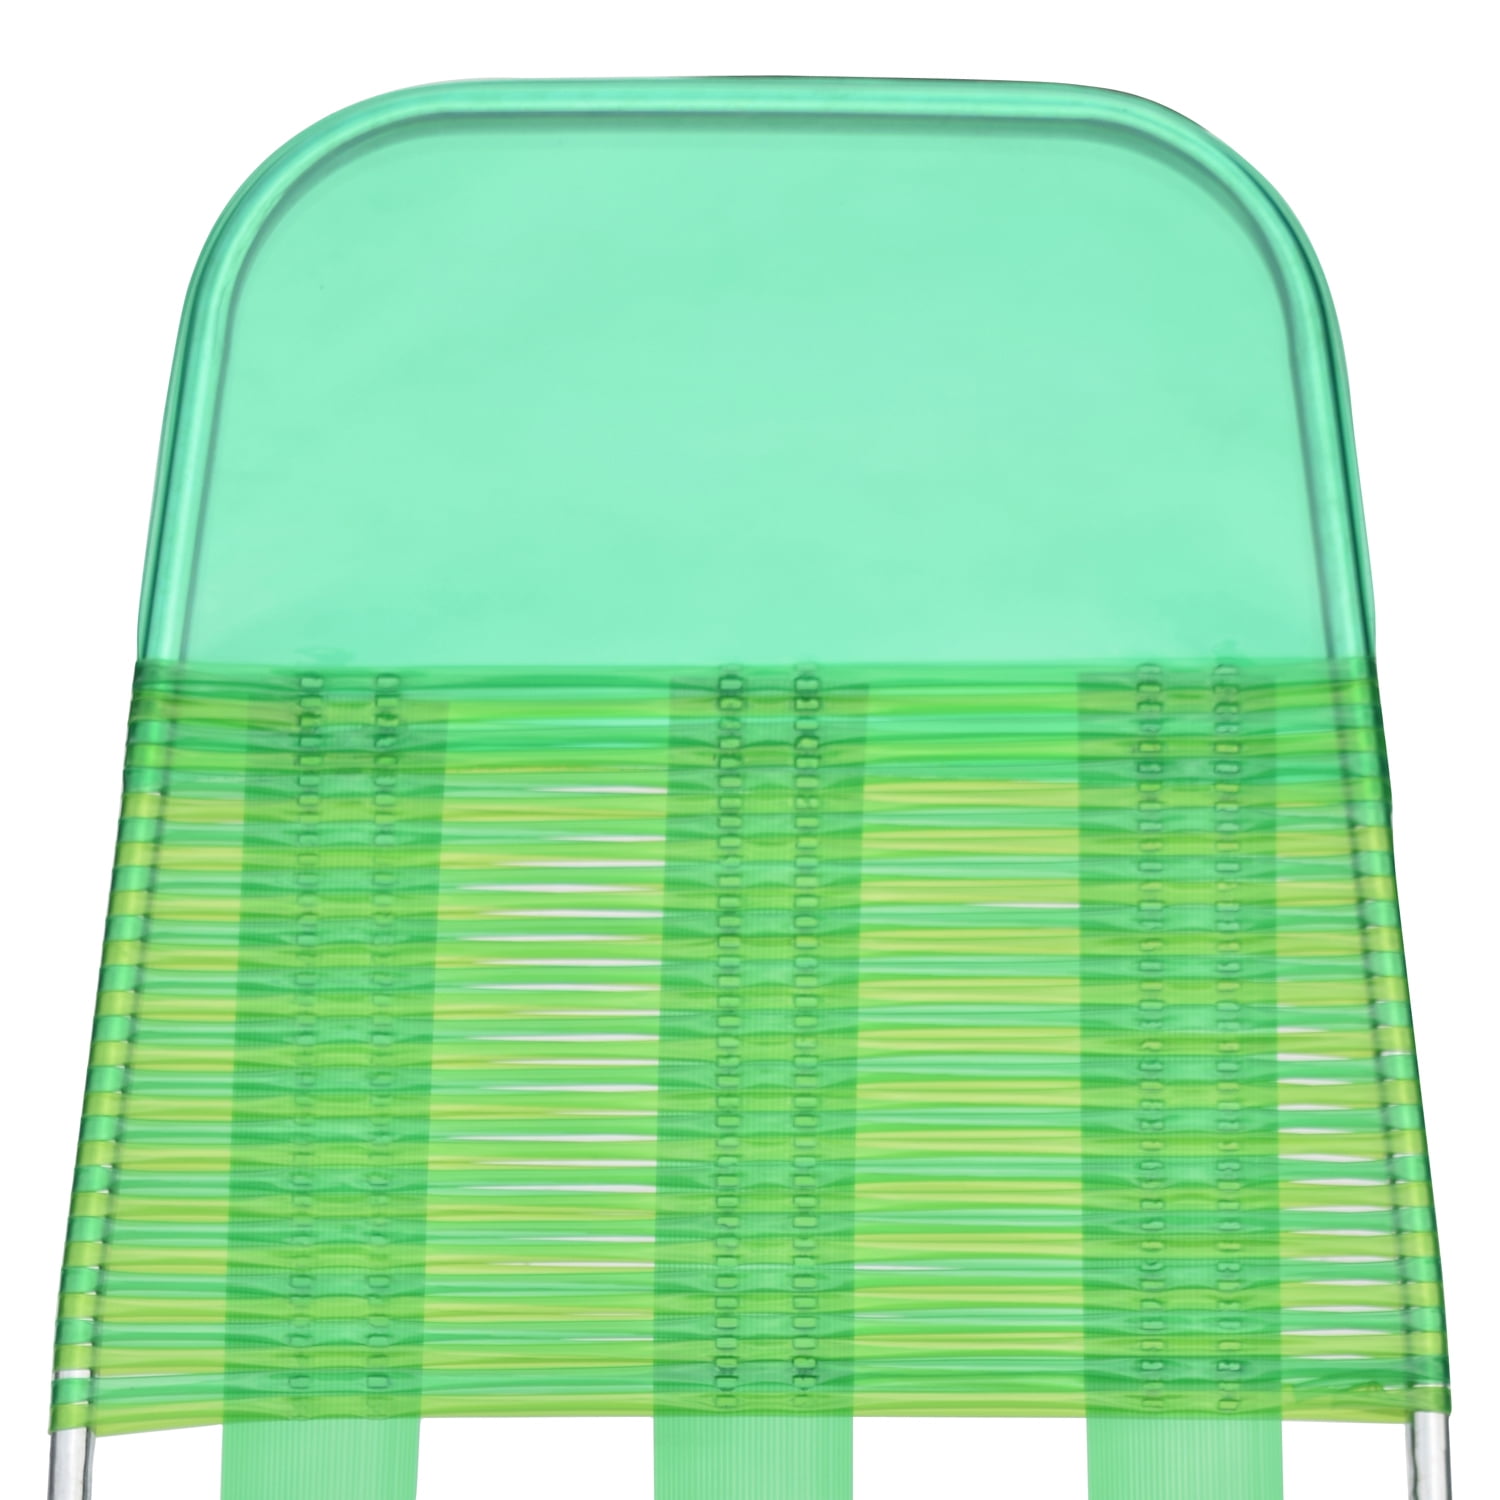 tri fold jelly lounge chair